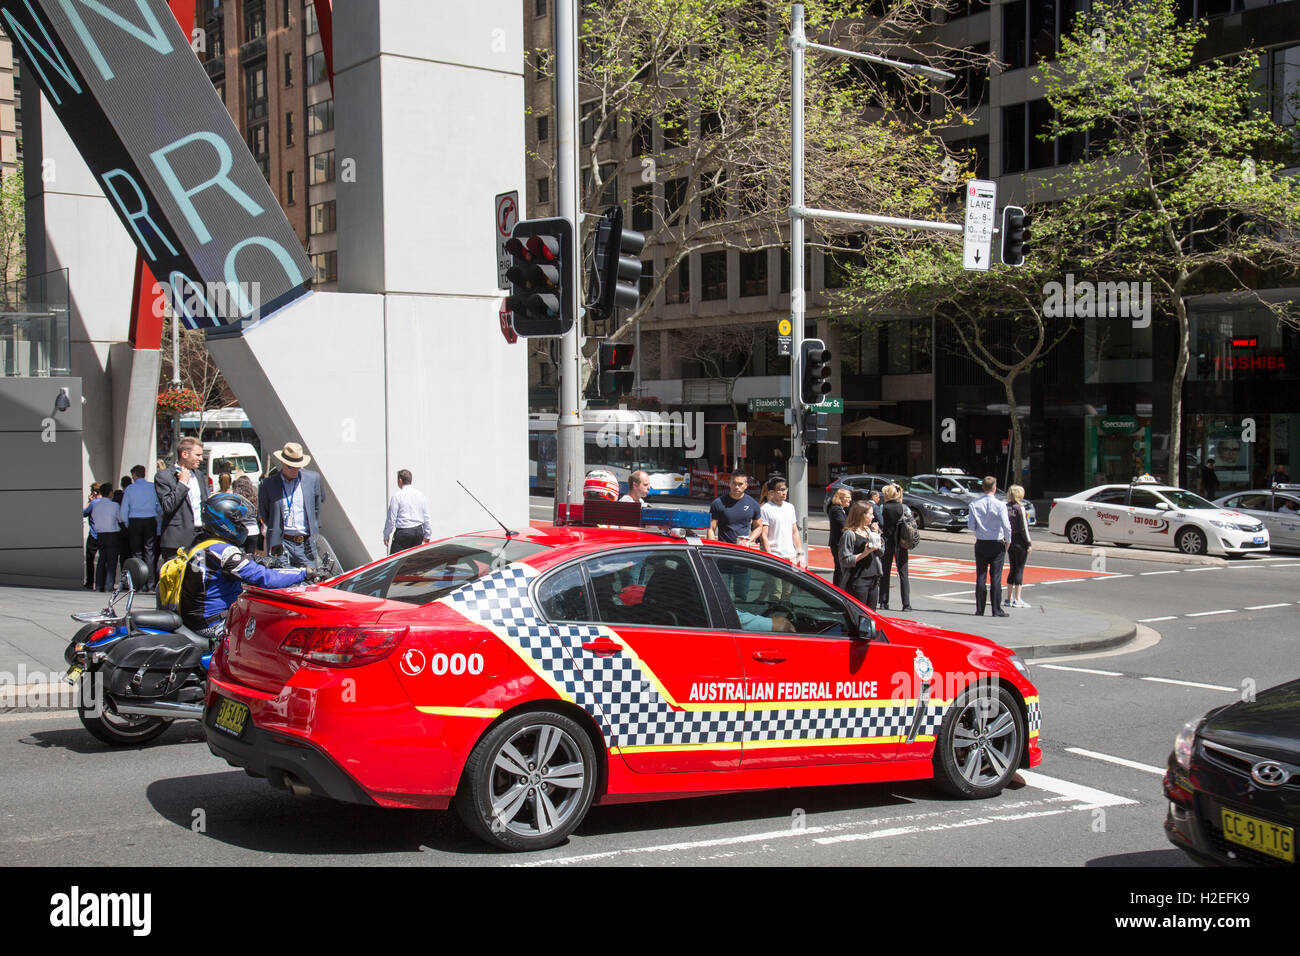 Australian Federal police AFP officers in a marked red police car in Sydney city centre, NSW, Australia Stock Photo